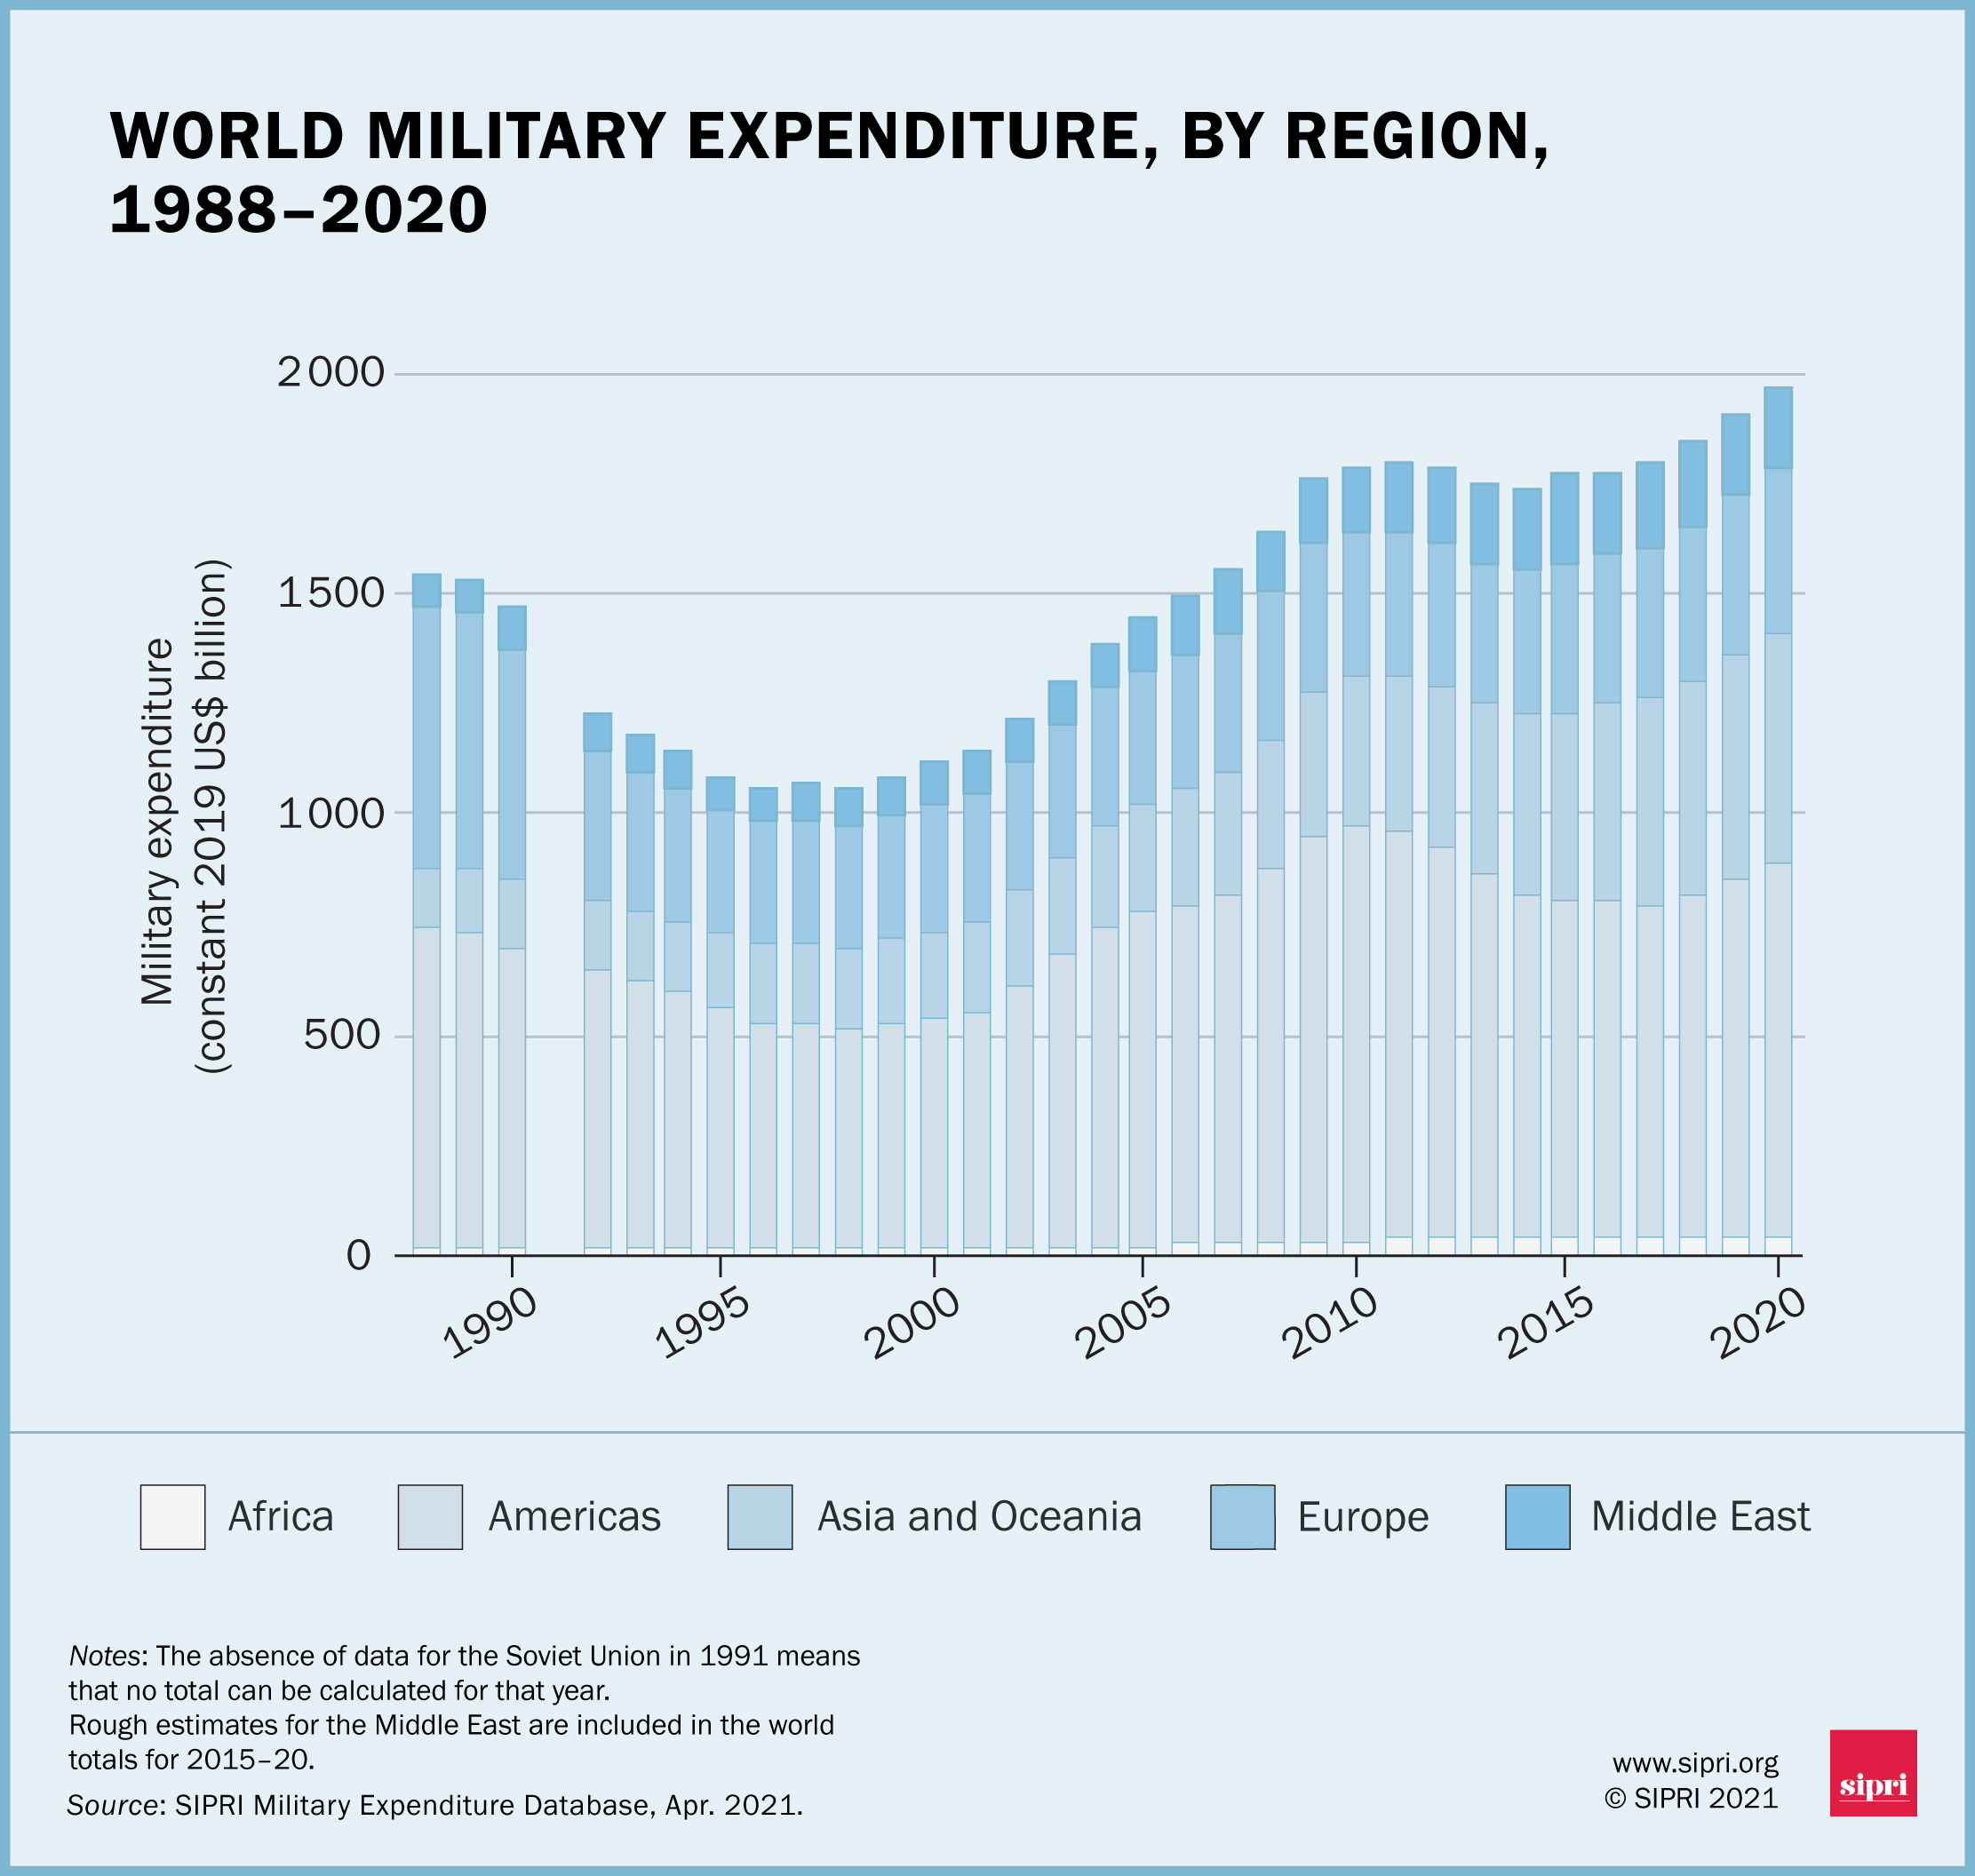 New SIPRI data on world military expenditure